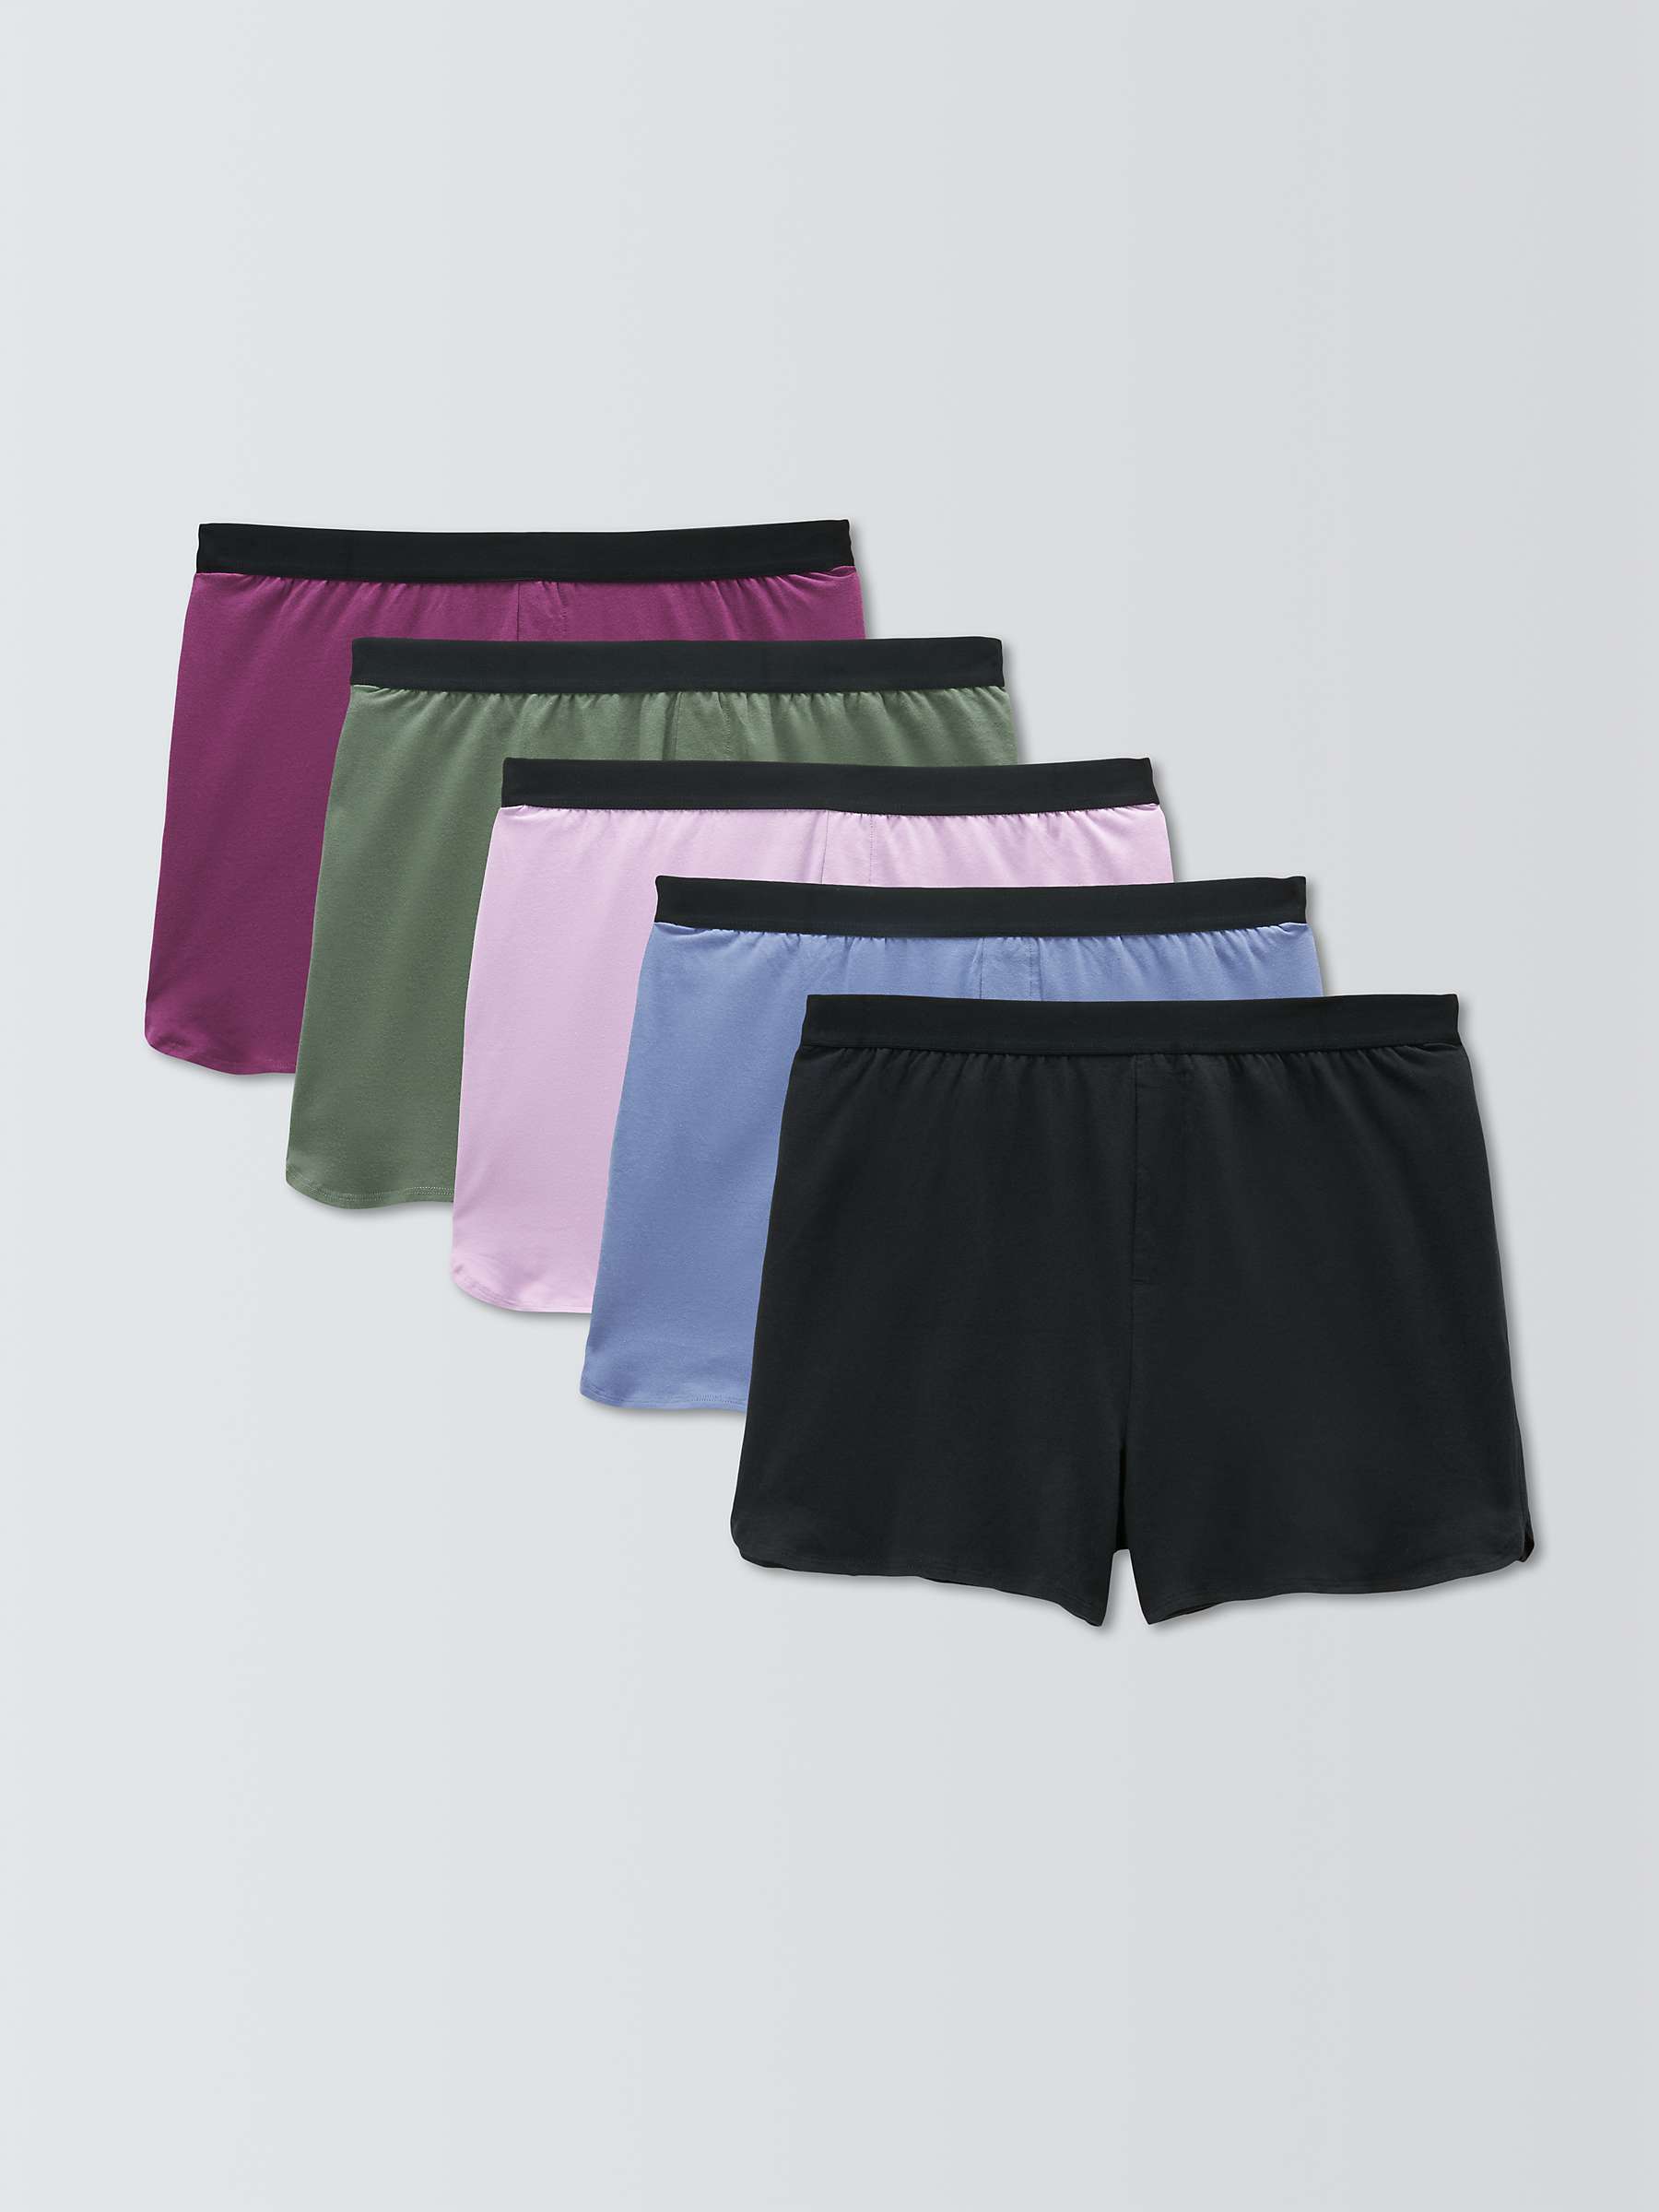 Buy John Lewis ANYDAY Cotton Boxers, Pack of 5, Plain Online at johnlewis.com